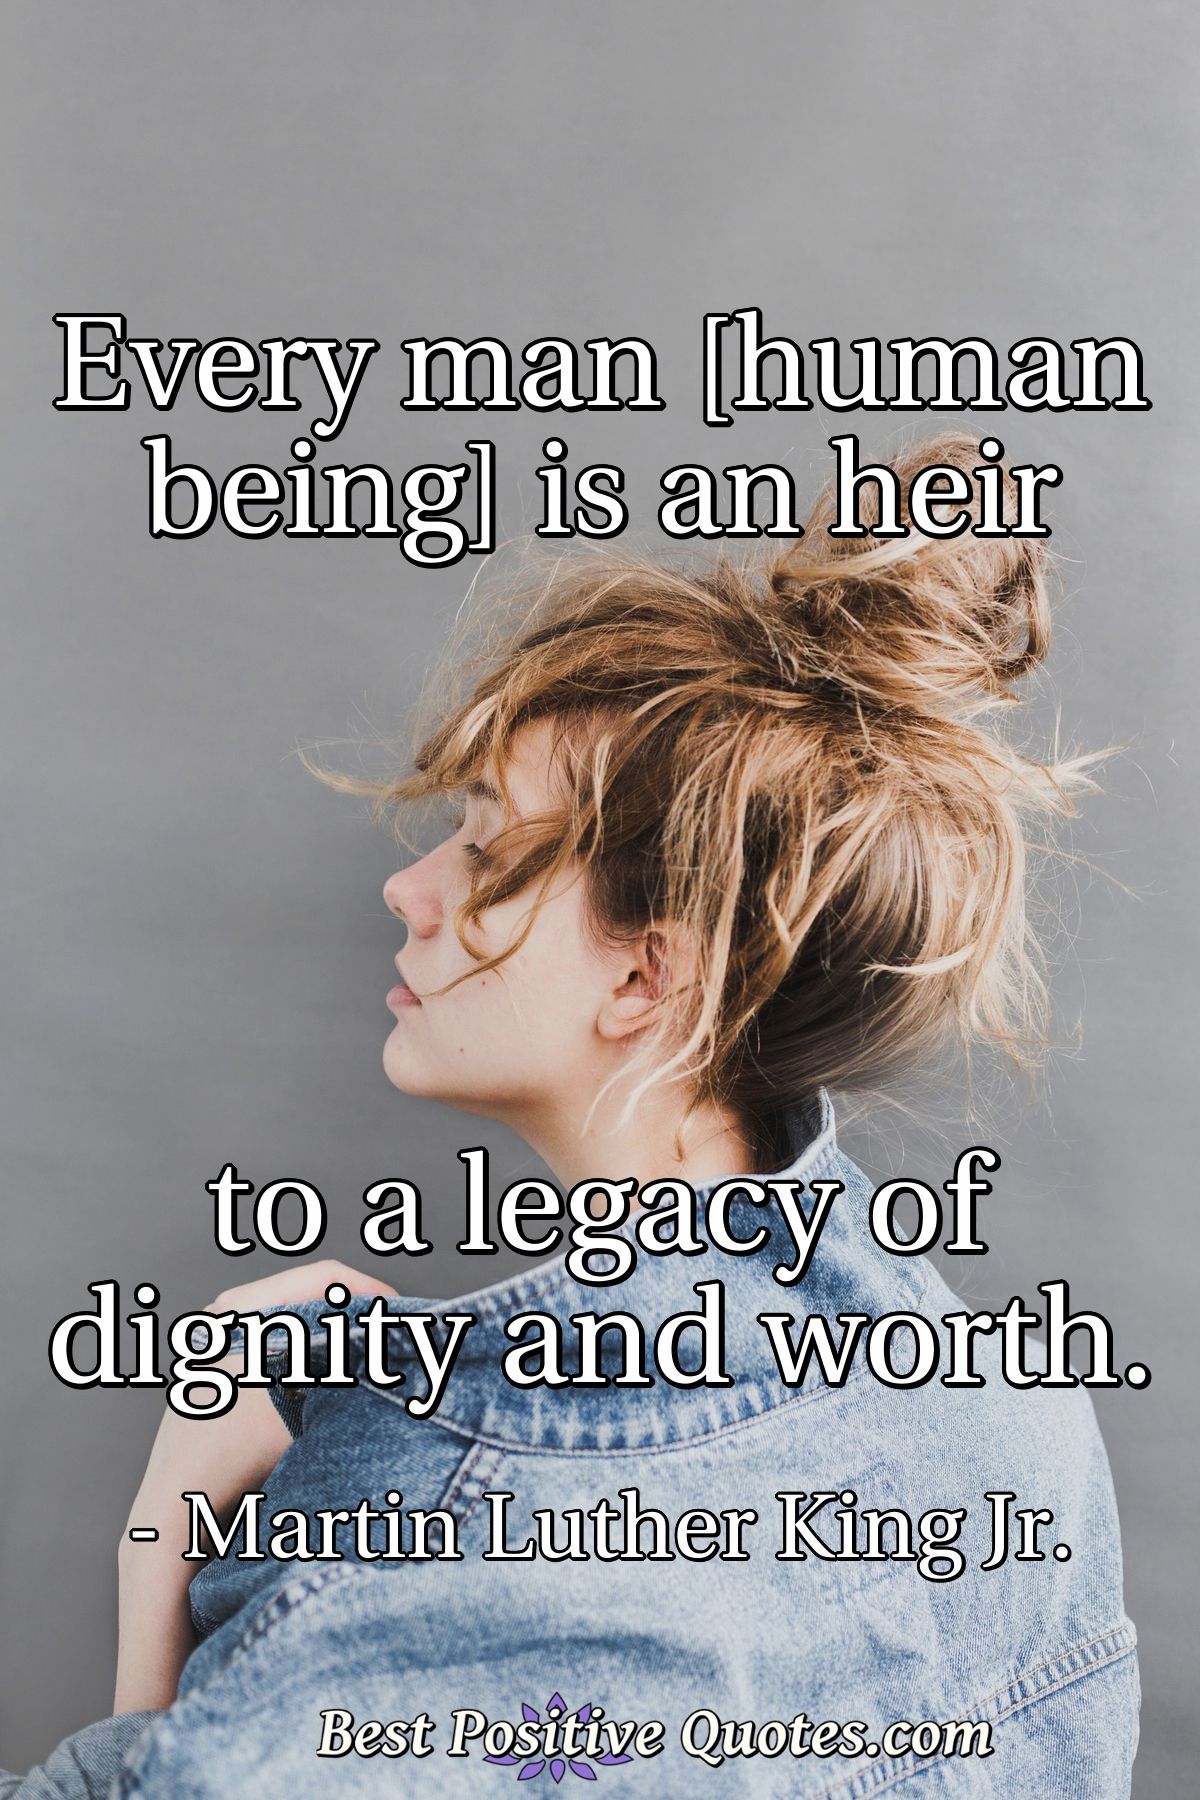 Every man [human being] is an heir to a legacy of dignity and worth. - Martin Luther King Jr.